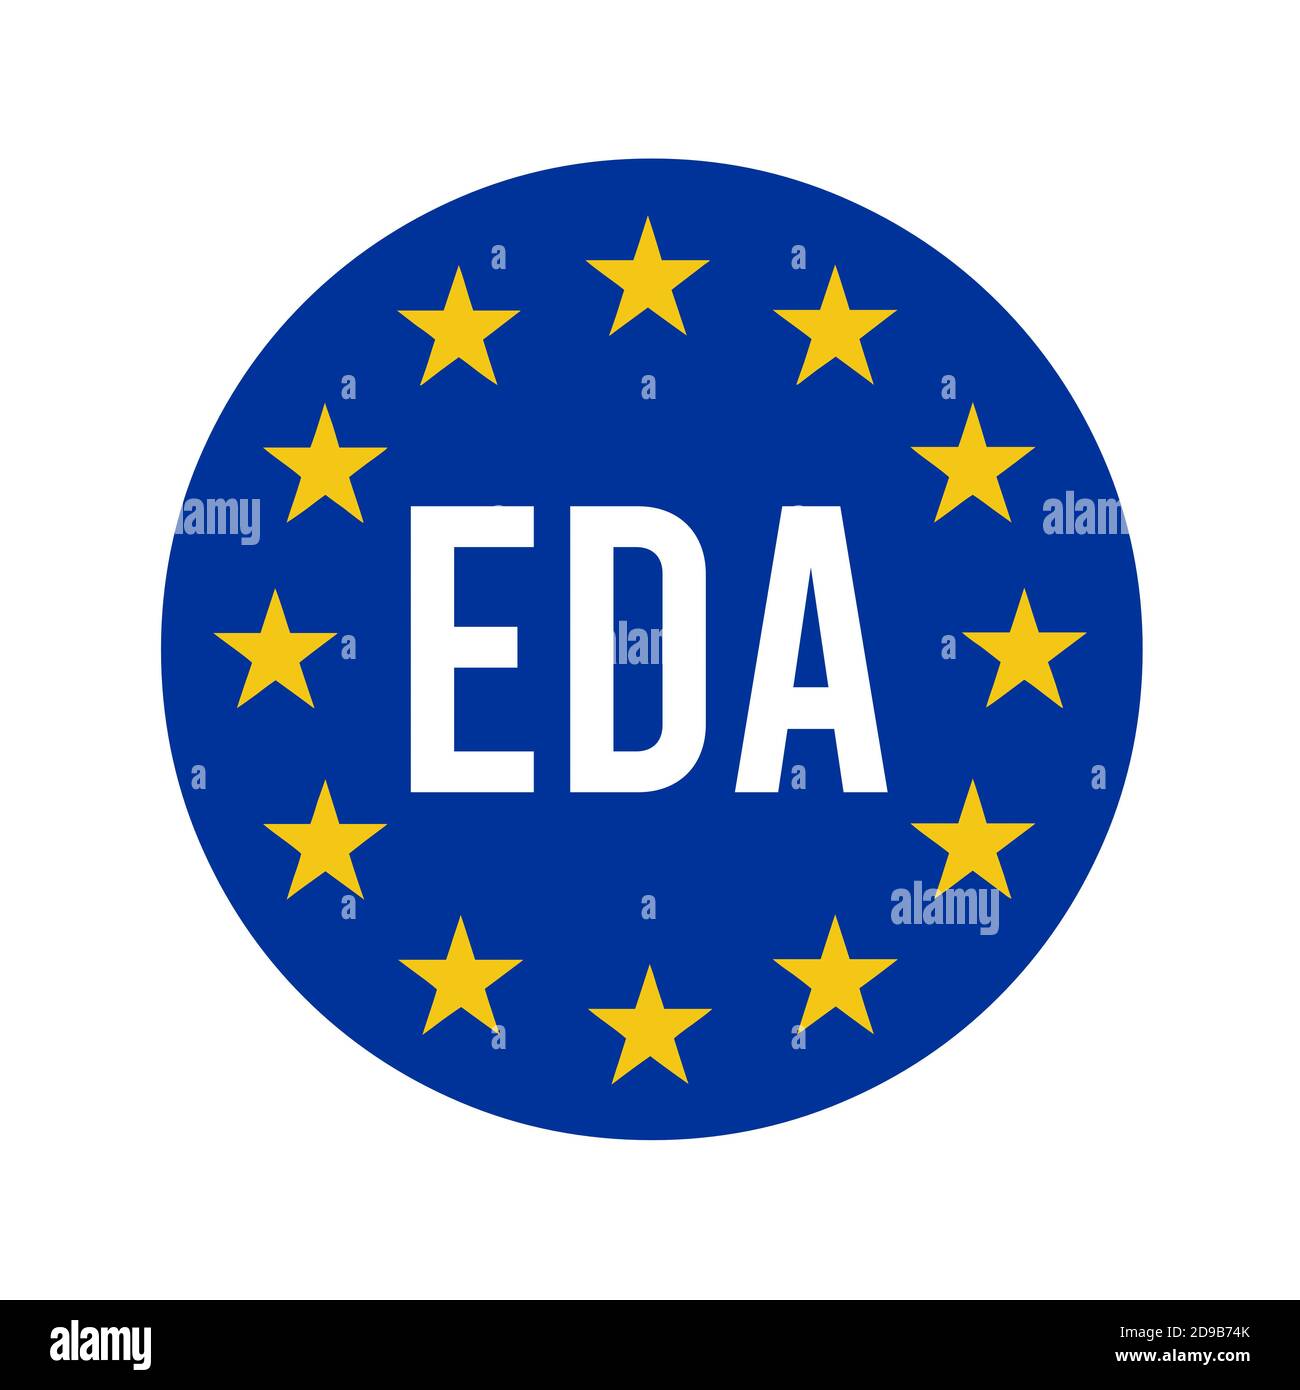 Eda logo hires stock photography and images Alamy